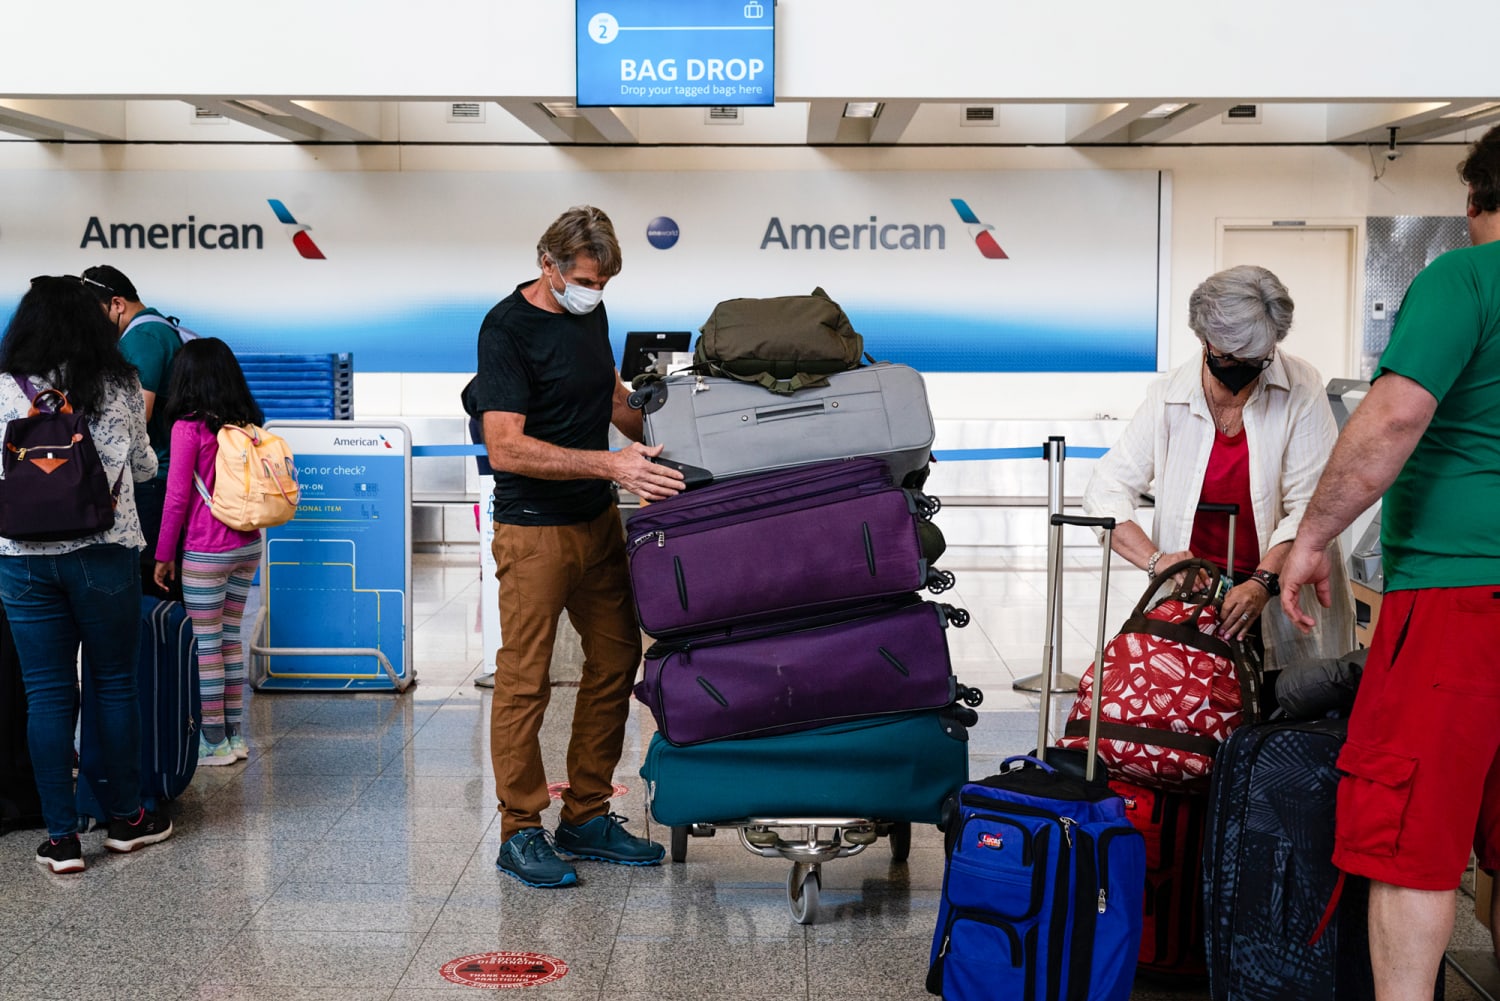 American Airlines raises bag fee for luggage checked at the airport